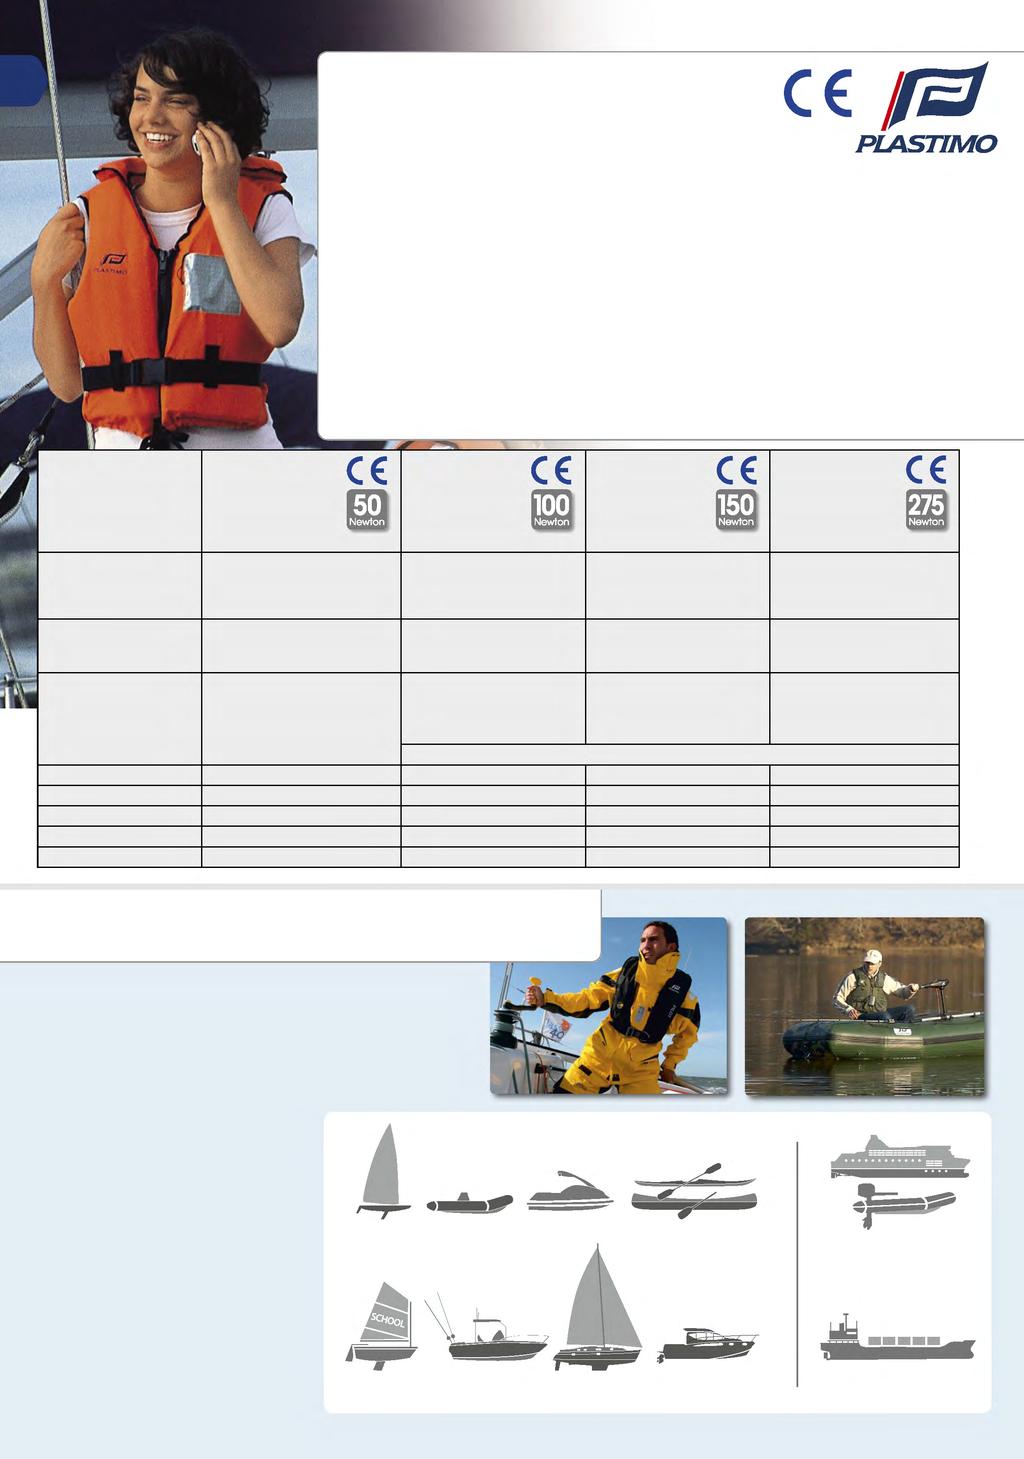 Lifejackets and buoyancy aids Lifejackets and buoyancy aids used in recreational or professional activities must comply with the specifications of the European Directive 89/686/CE on Personal